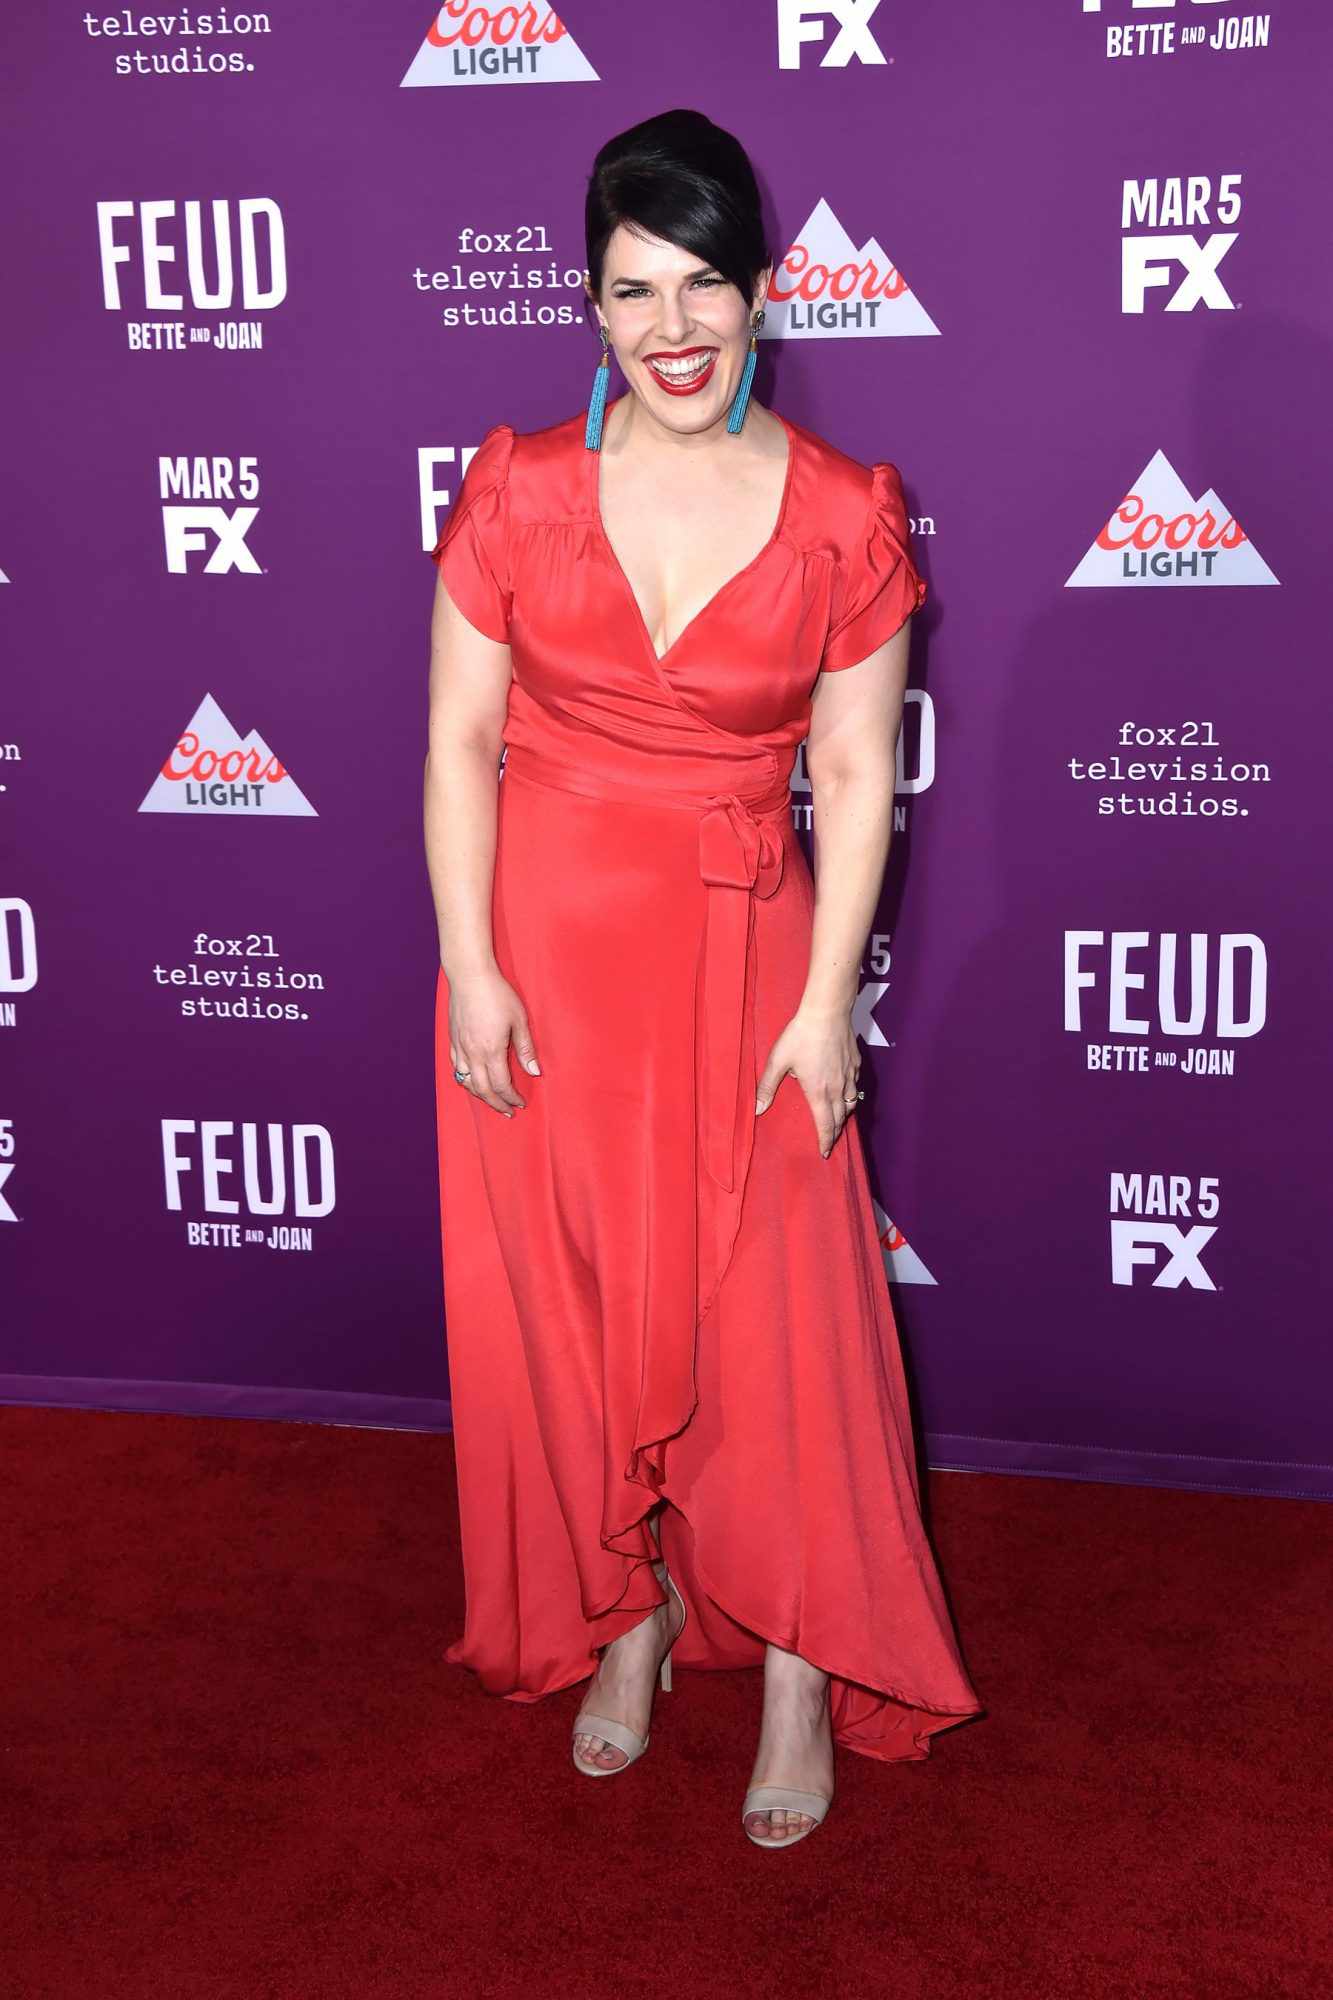 Premiere Of FX Network's "Feud: Bette And Joan" - Arrivals